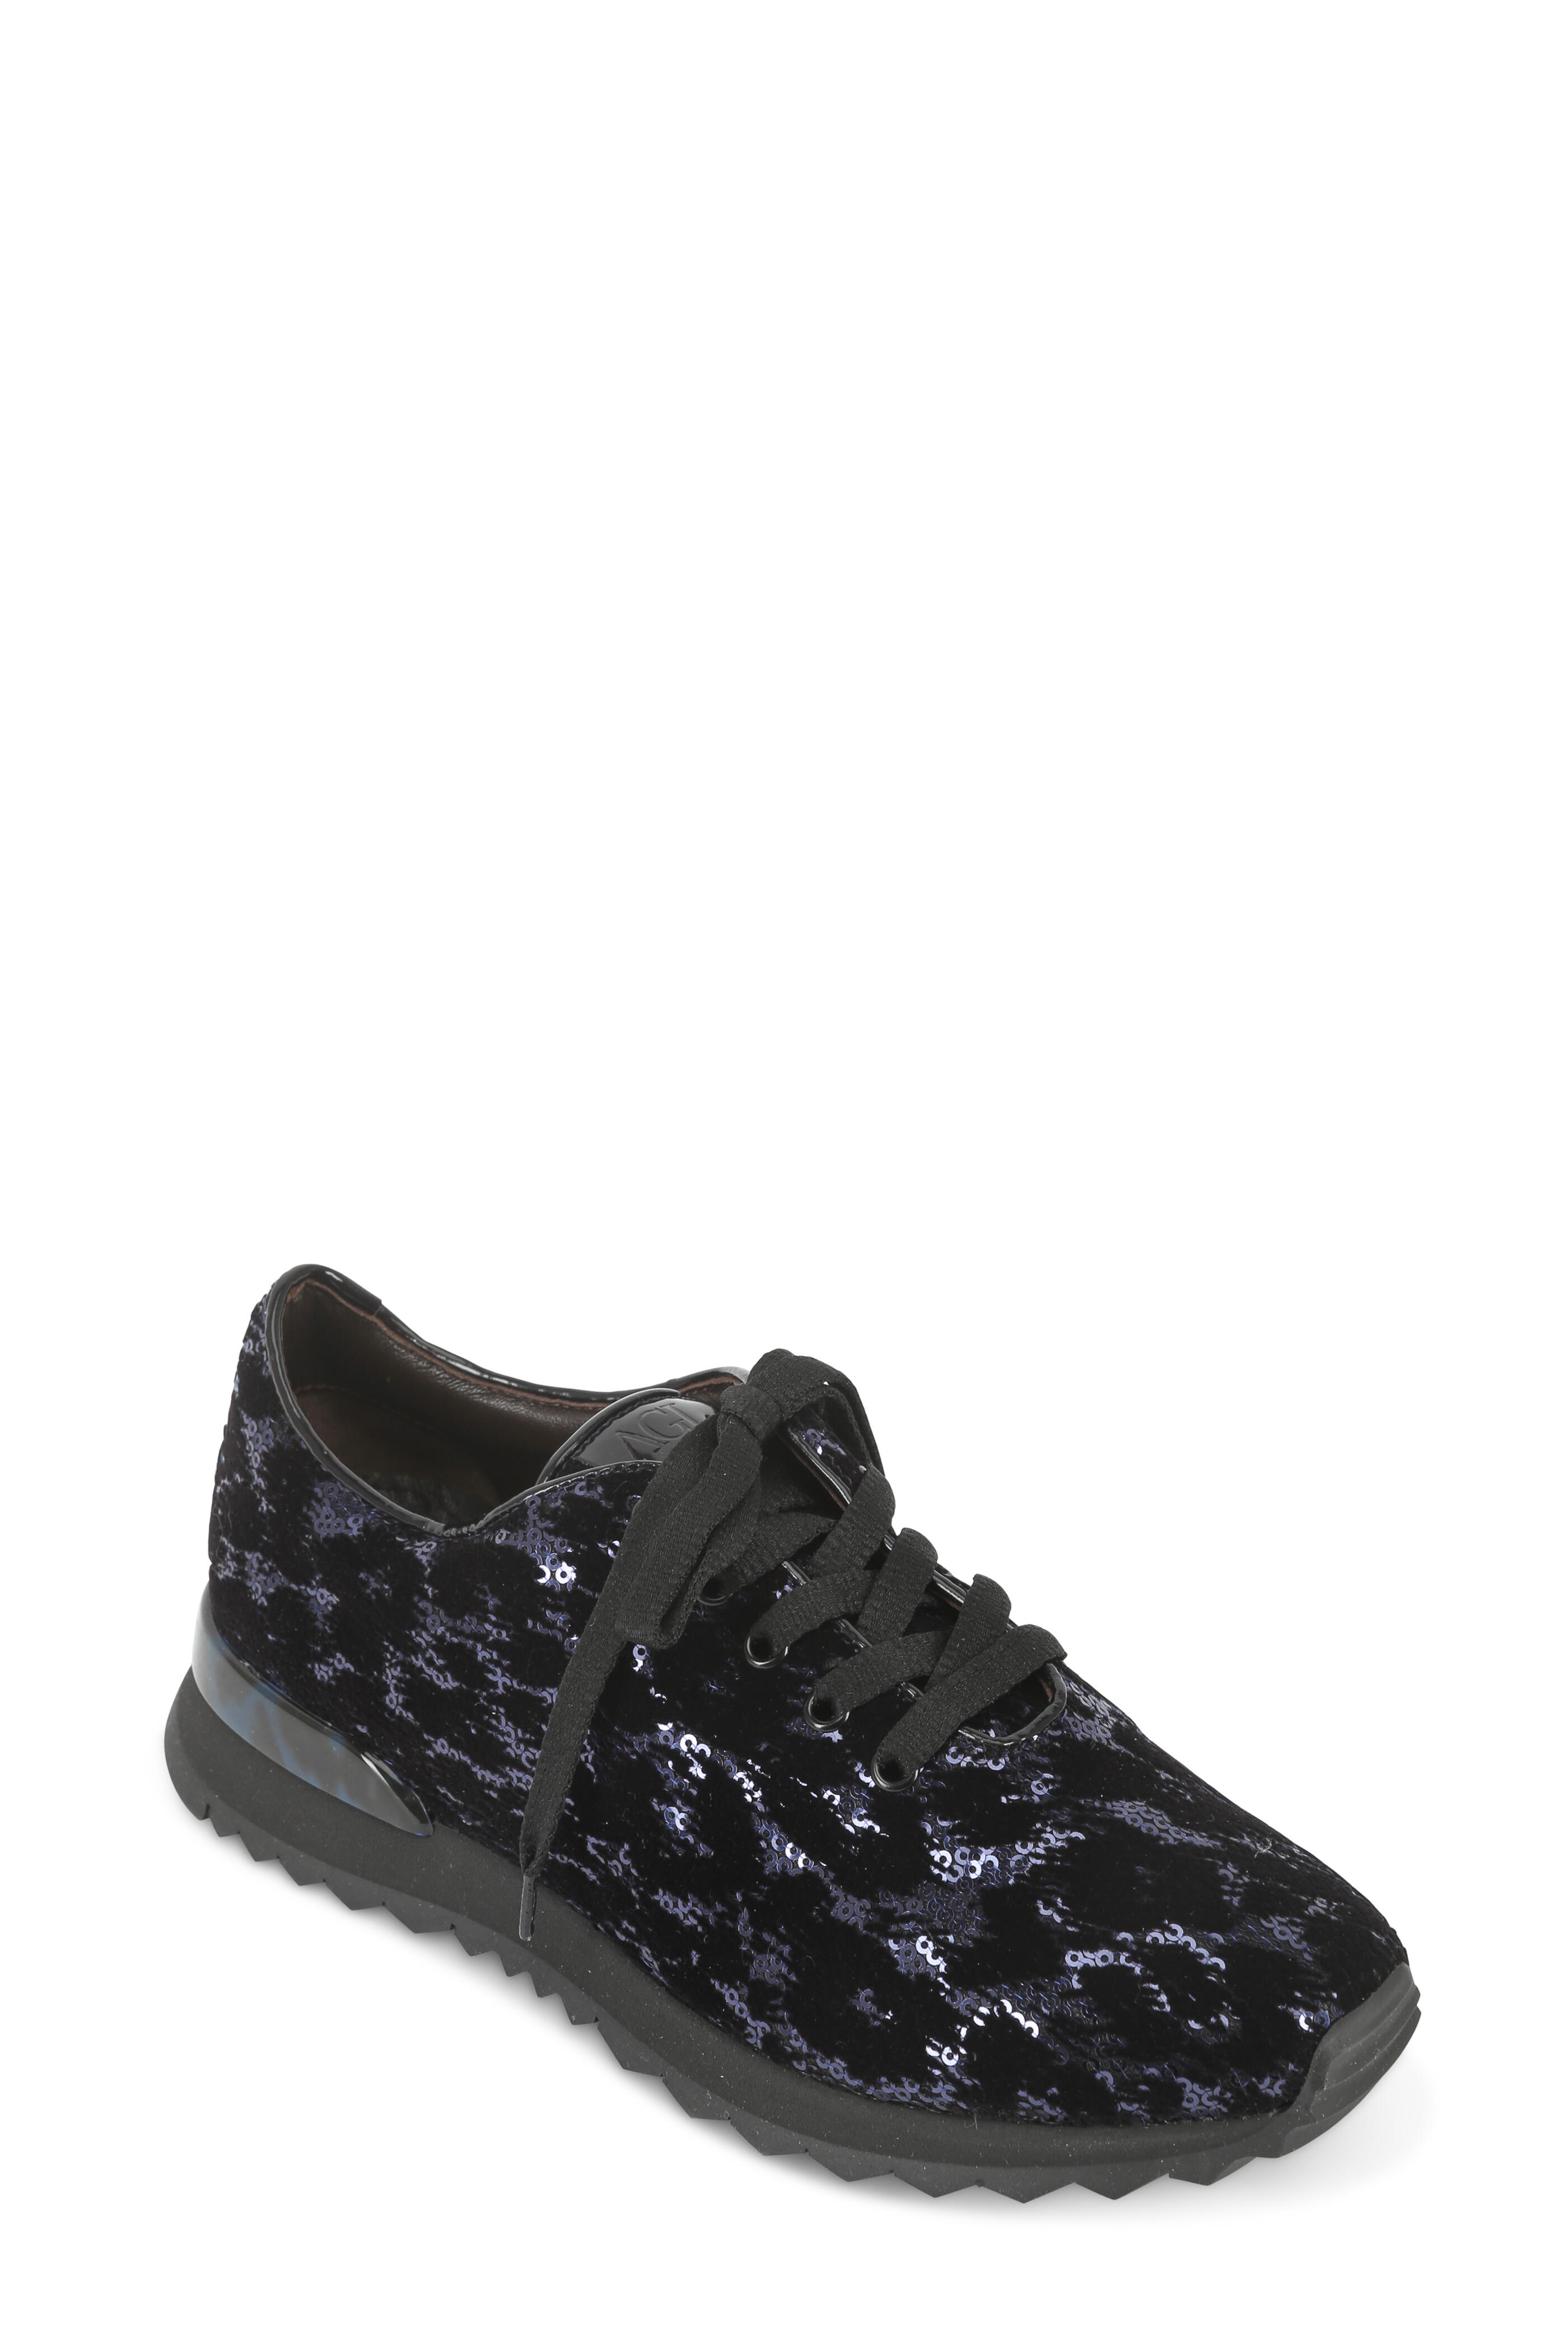 Cape Robbin Sequin Athletic Shoes for Women